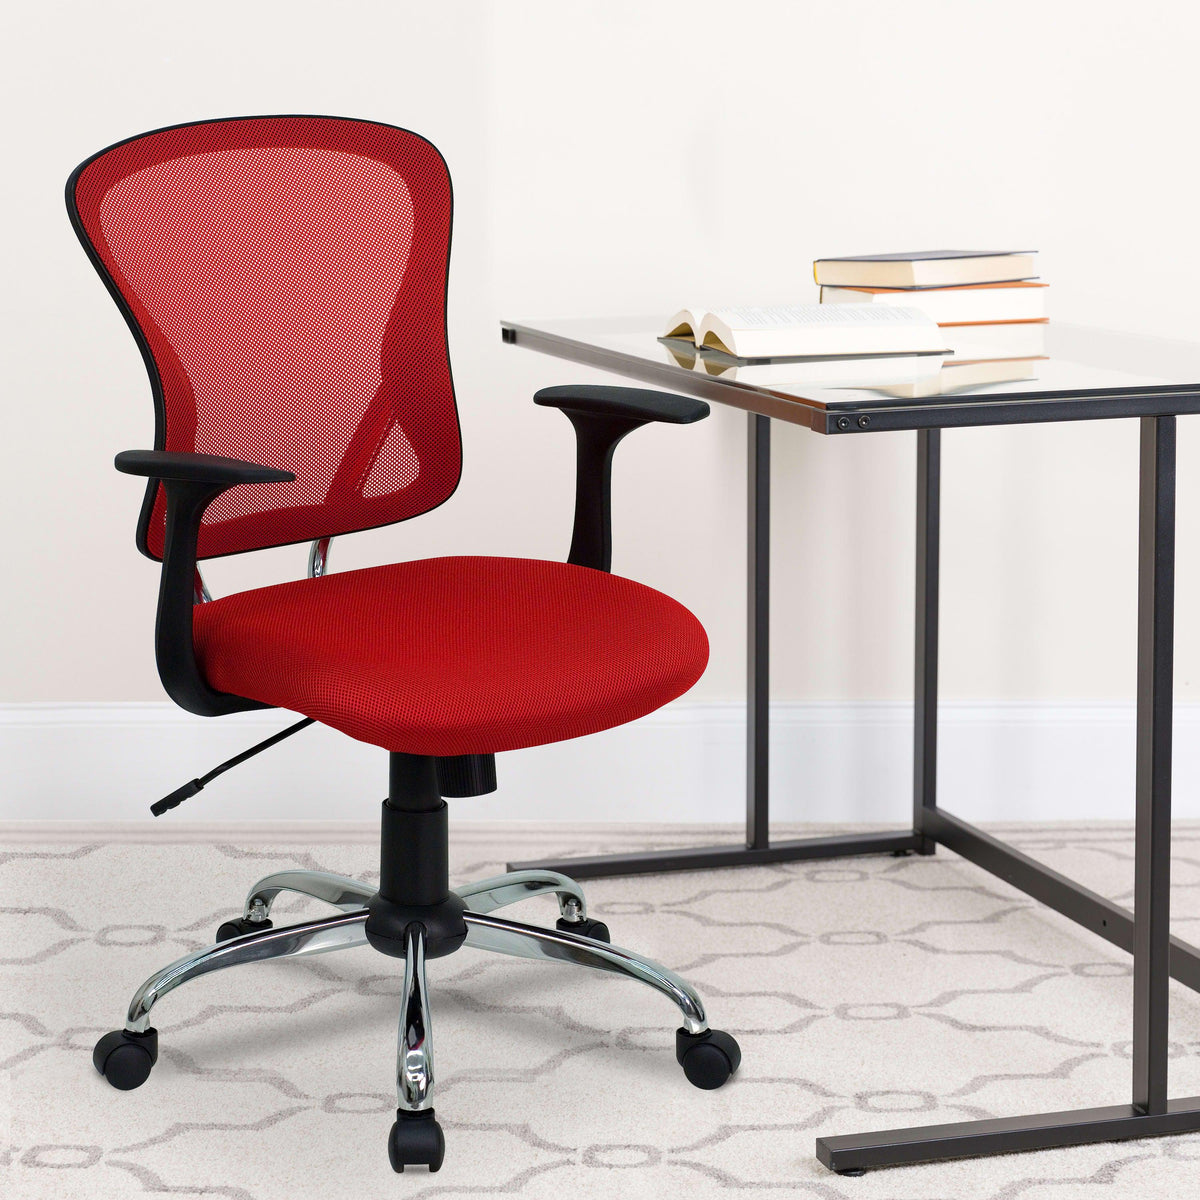 Red |#| Mid-Back Red Mesh Swivel Task Office Chair with Chrome Base and Arms